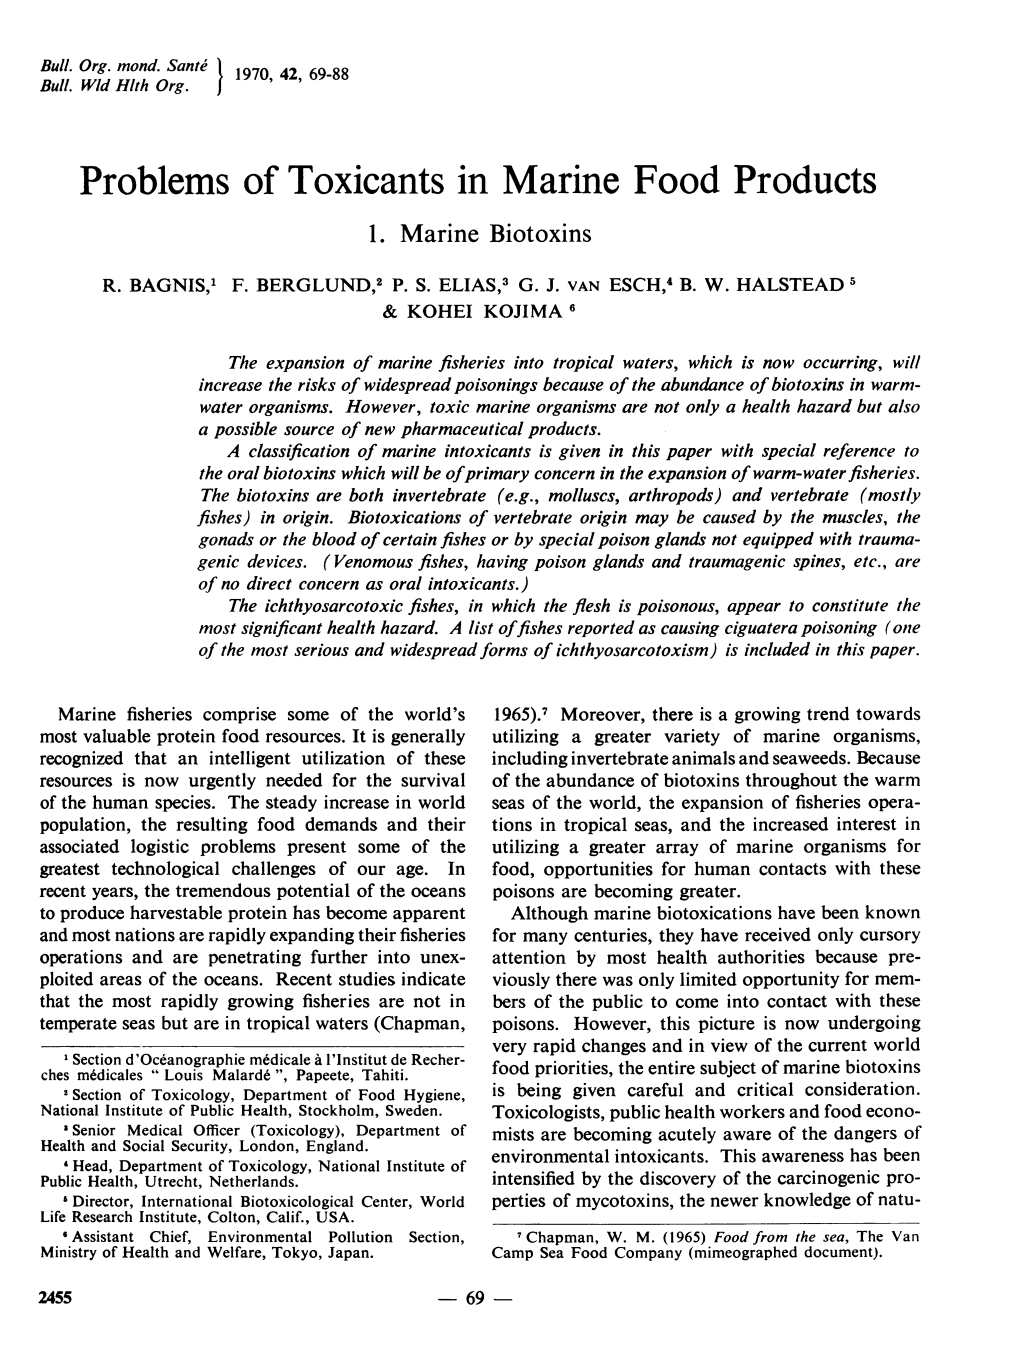 Problems of Toxicants in Marine Food Products 1